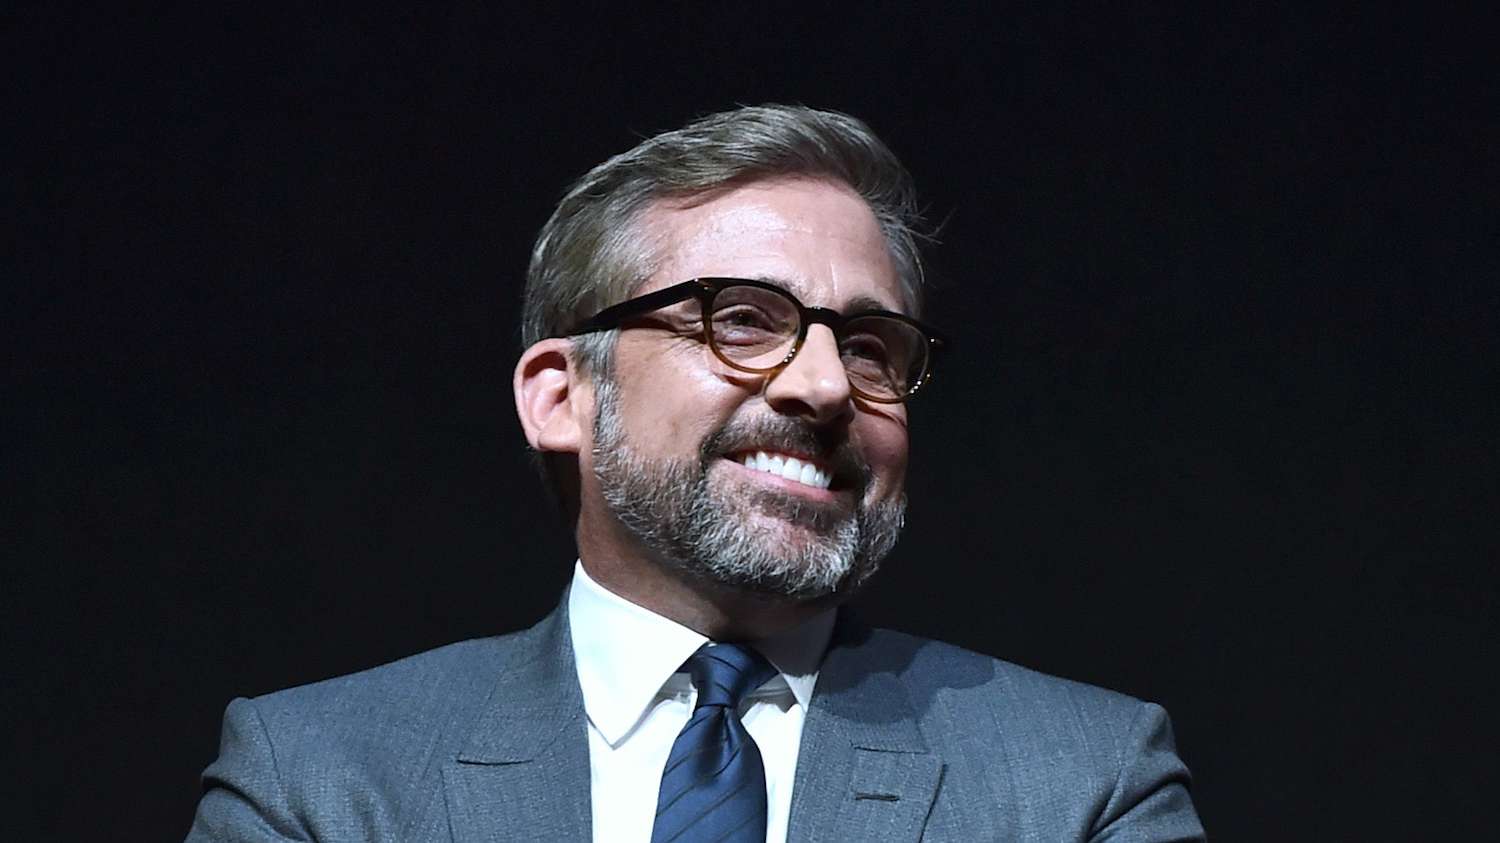 Surprising Facts About Steve Carell